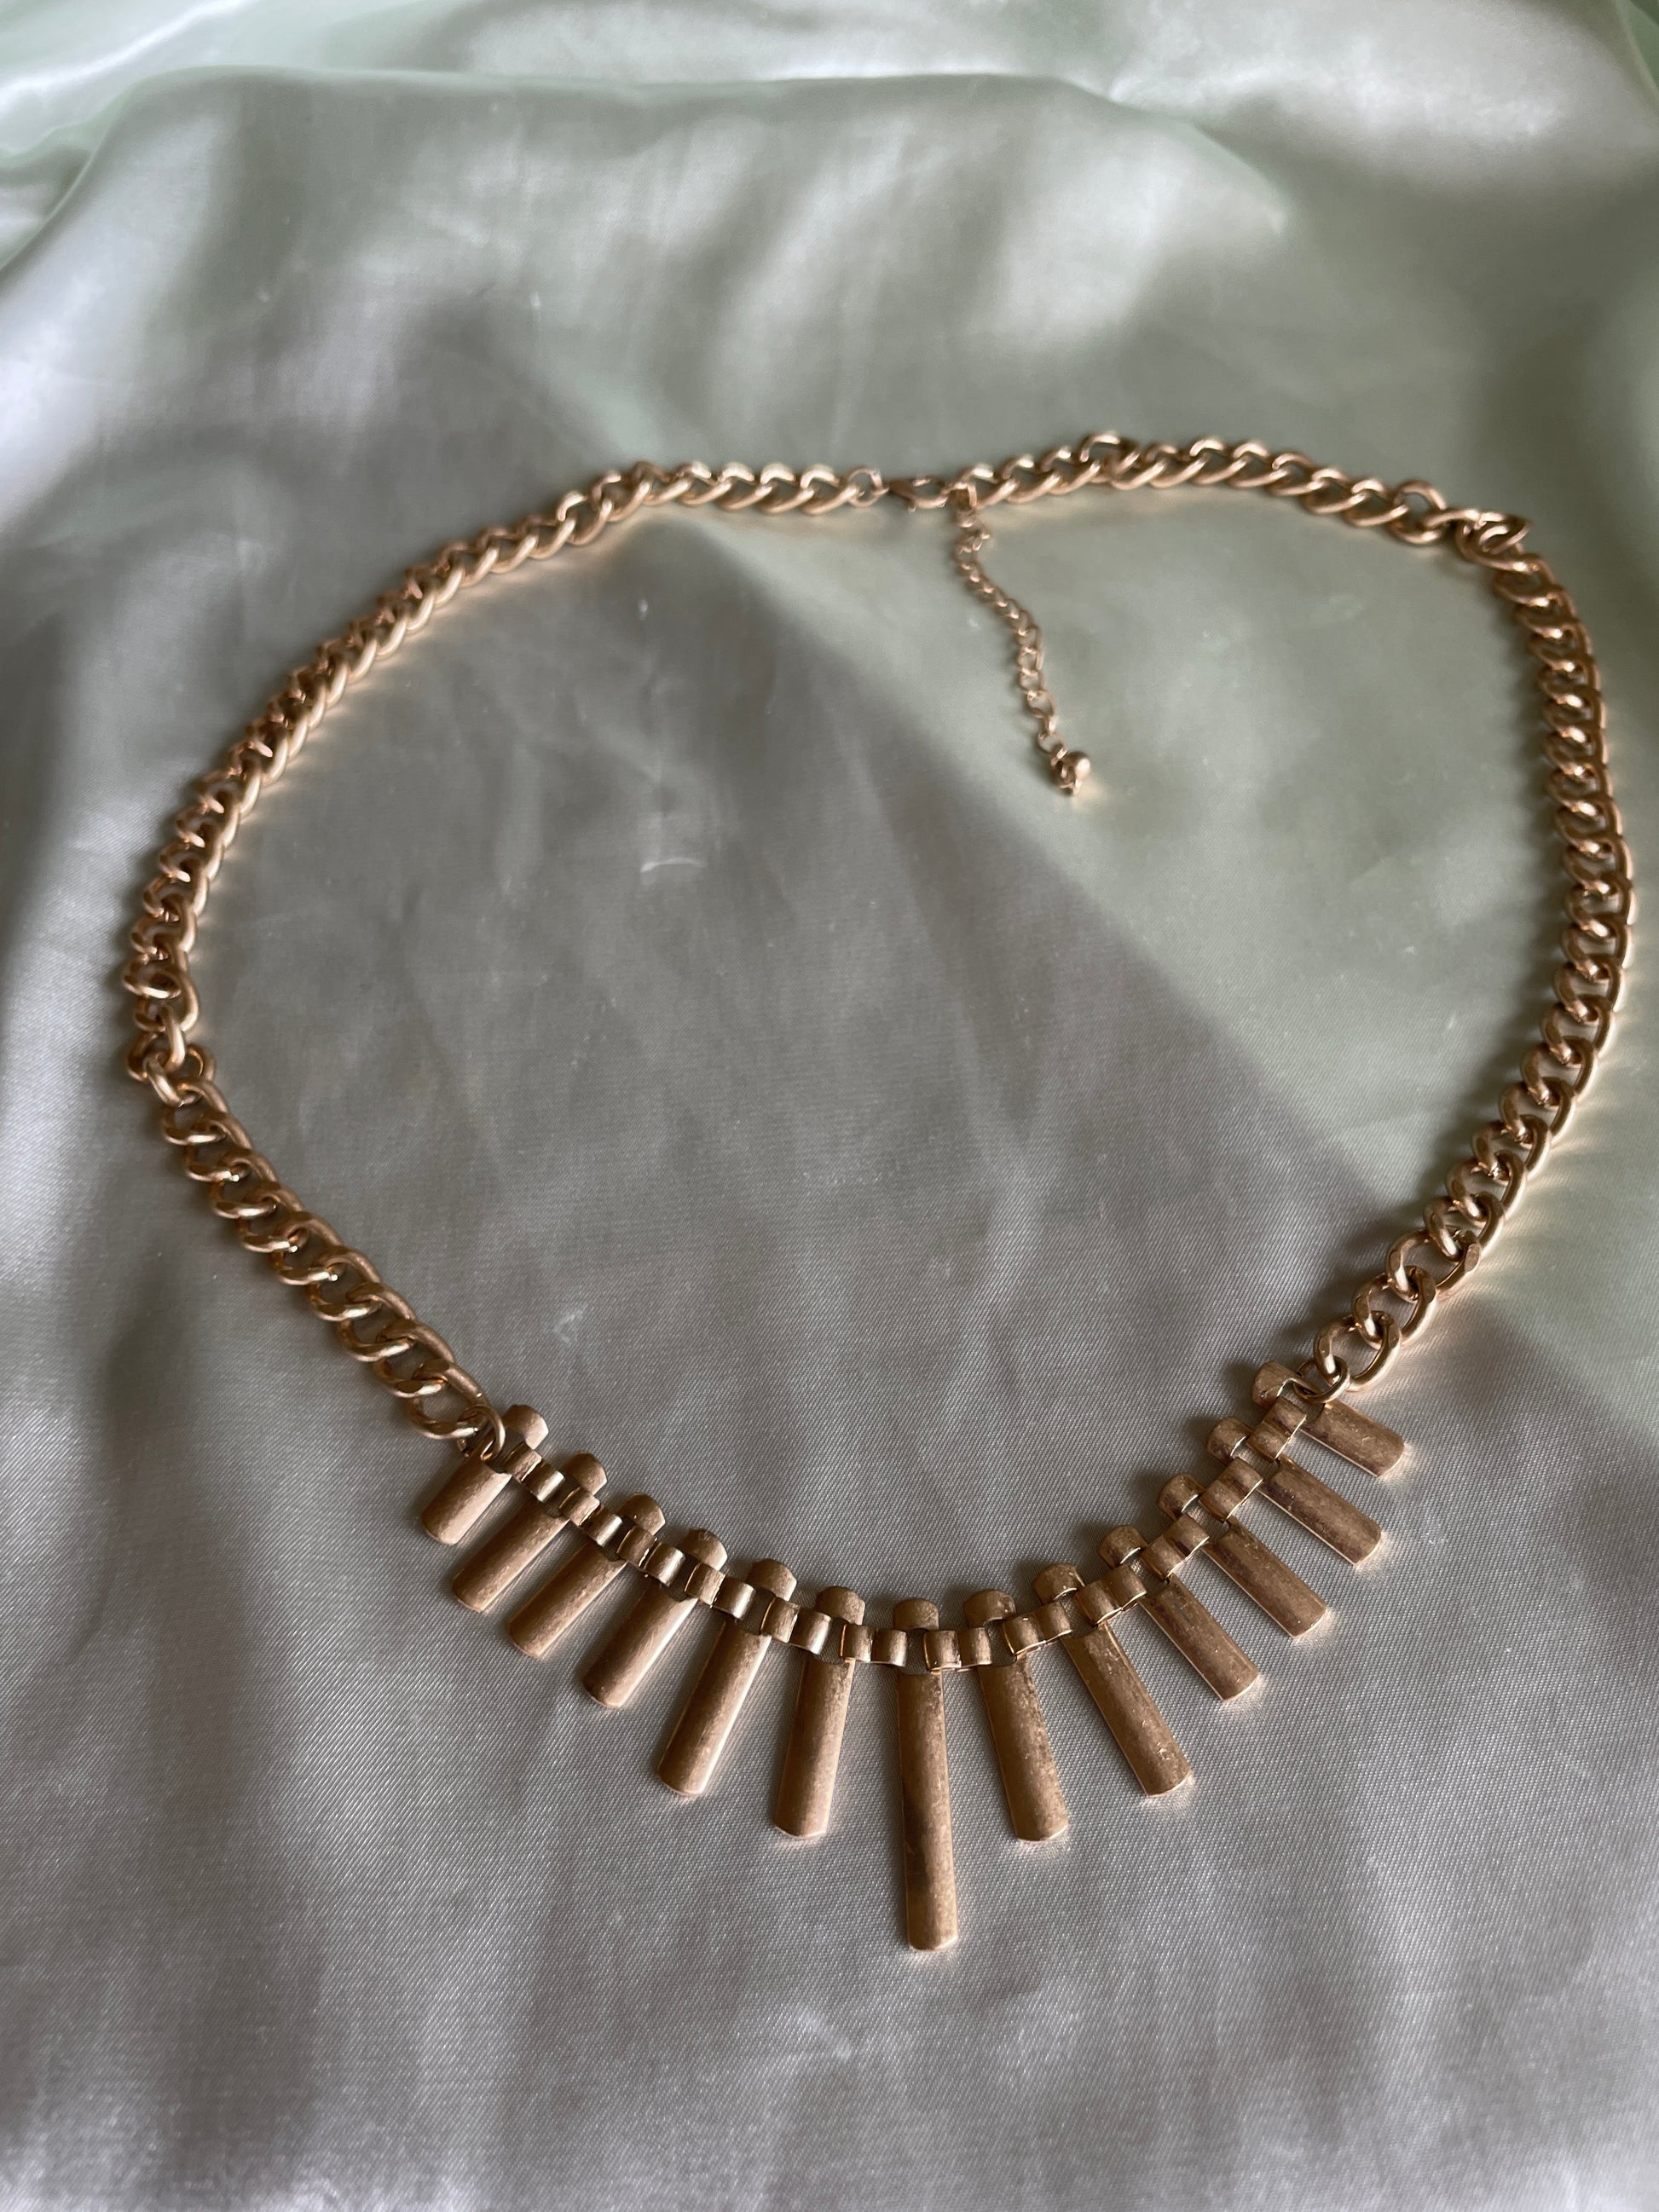  80s Gold Tone Spiked Egyptian Style Necklace